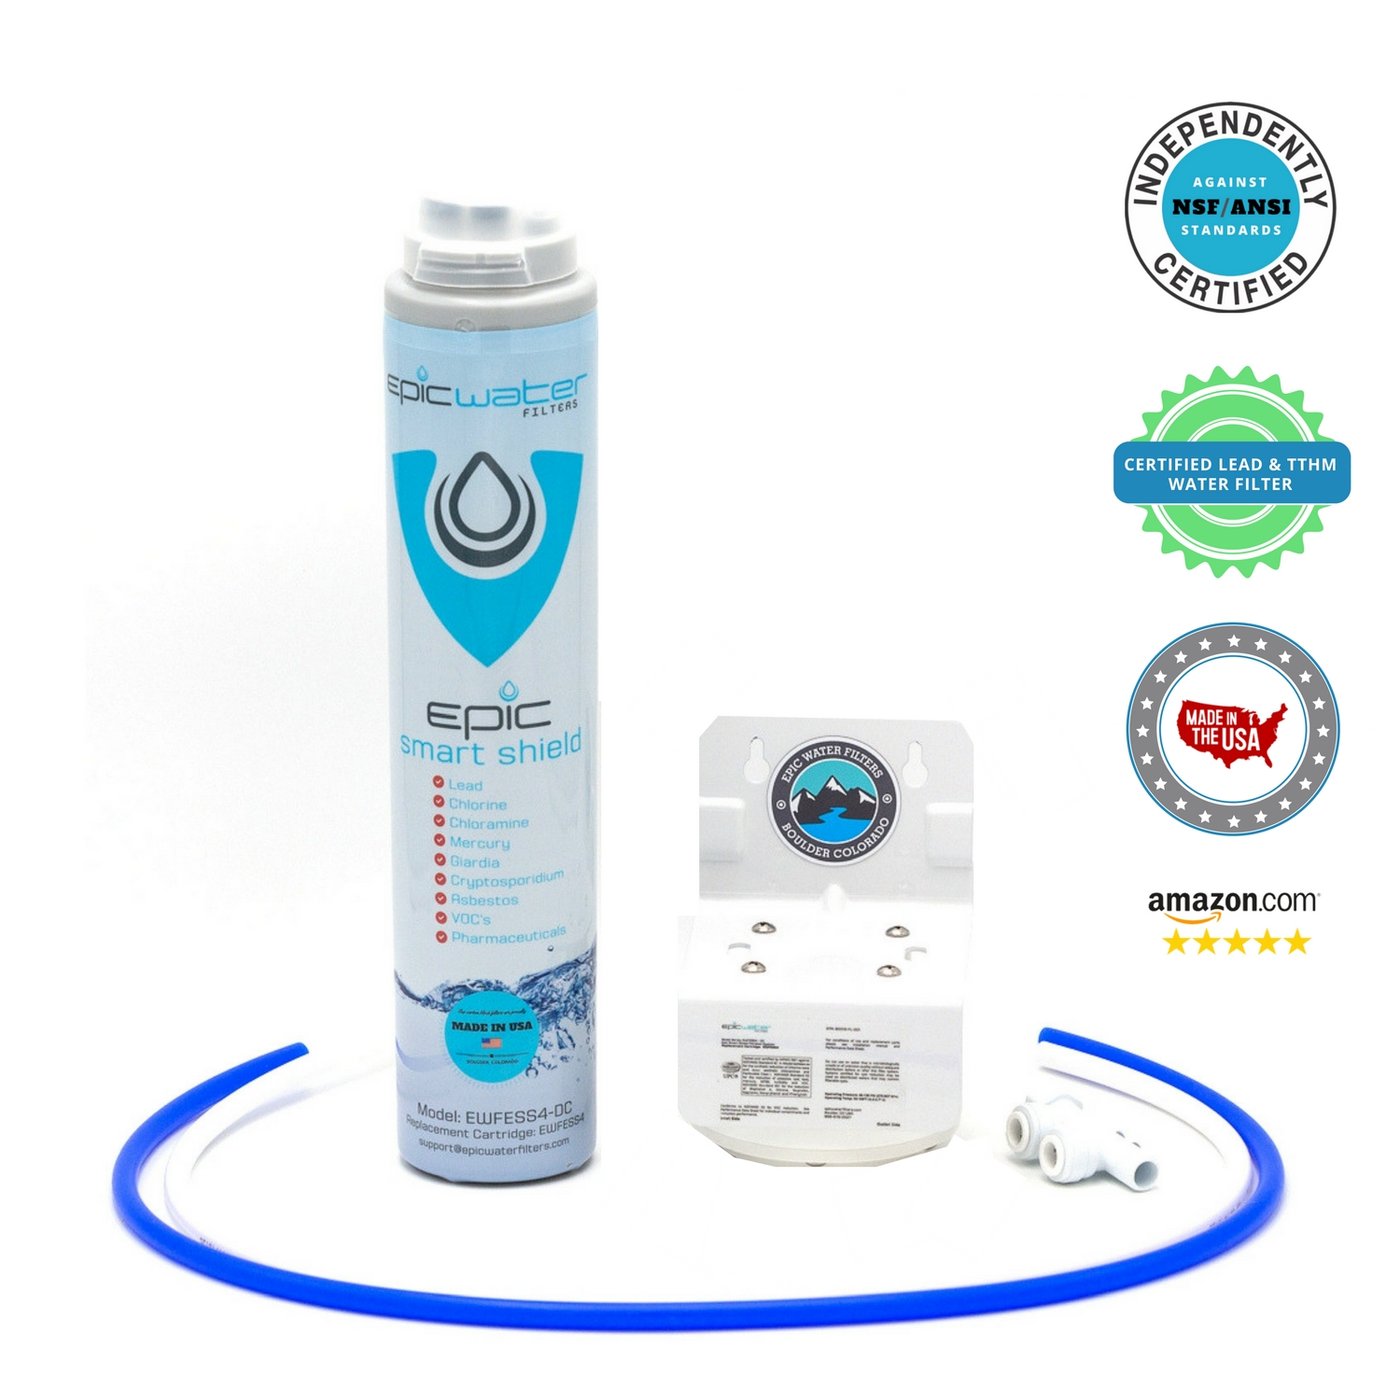 Epic Smart Shield System Direct Connect Under Sink Water Filter System